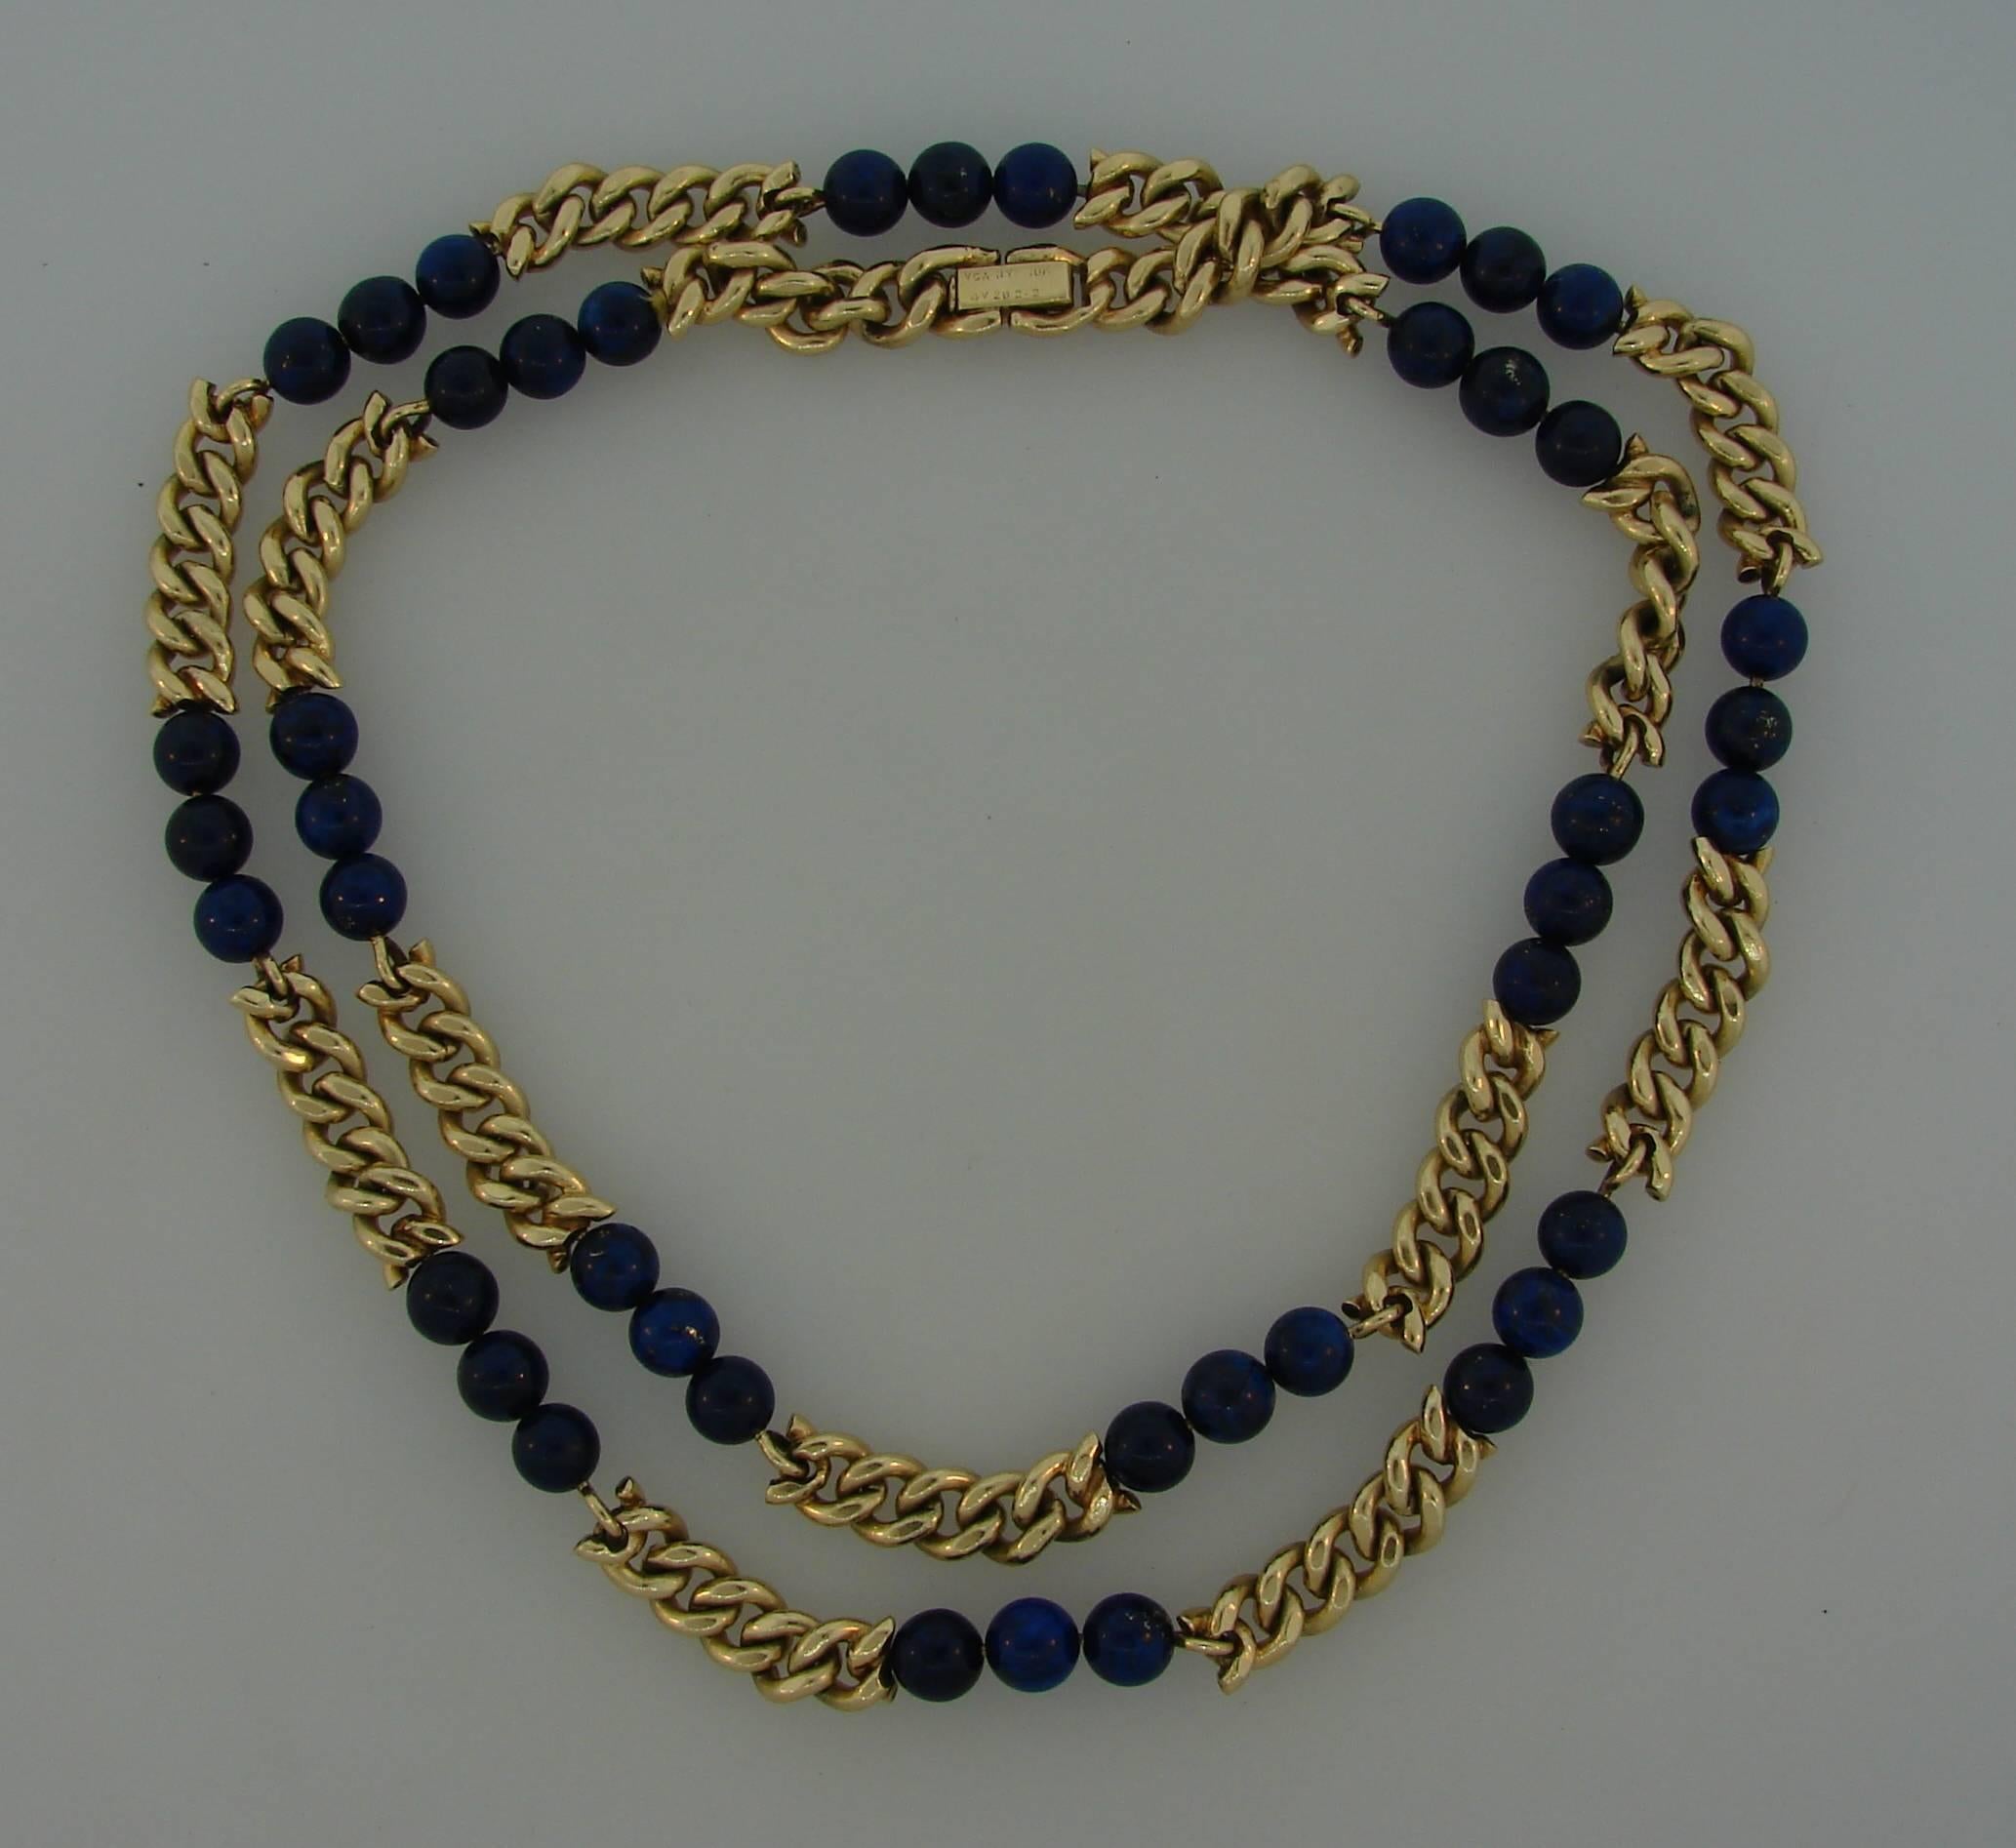 Nice and wearable necklace created by Van Cleef & Arpels in New York in the 1970s. 
Made of 14 karat (stamped) yellow gold and lapis lazuli beads, the clasp marked 18 karat.  The necklace is 30 inches (76 cm) long, 1/4 inch (0.7 cm) wide and weighs